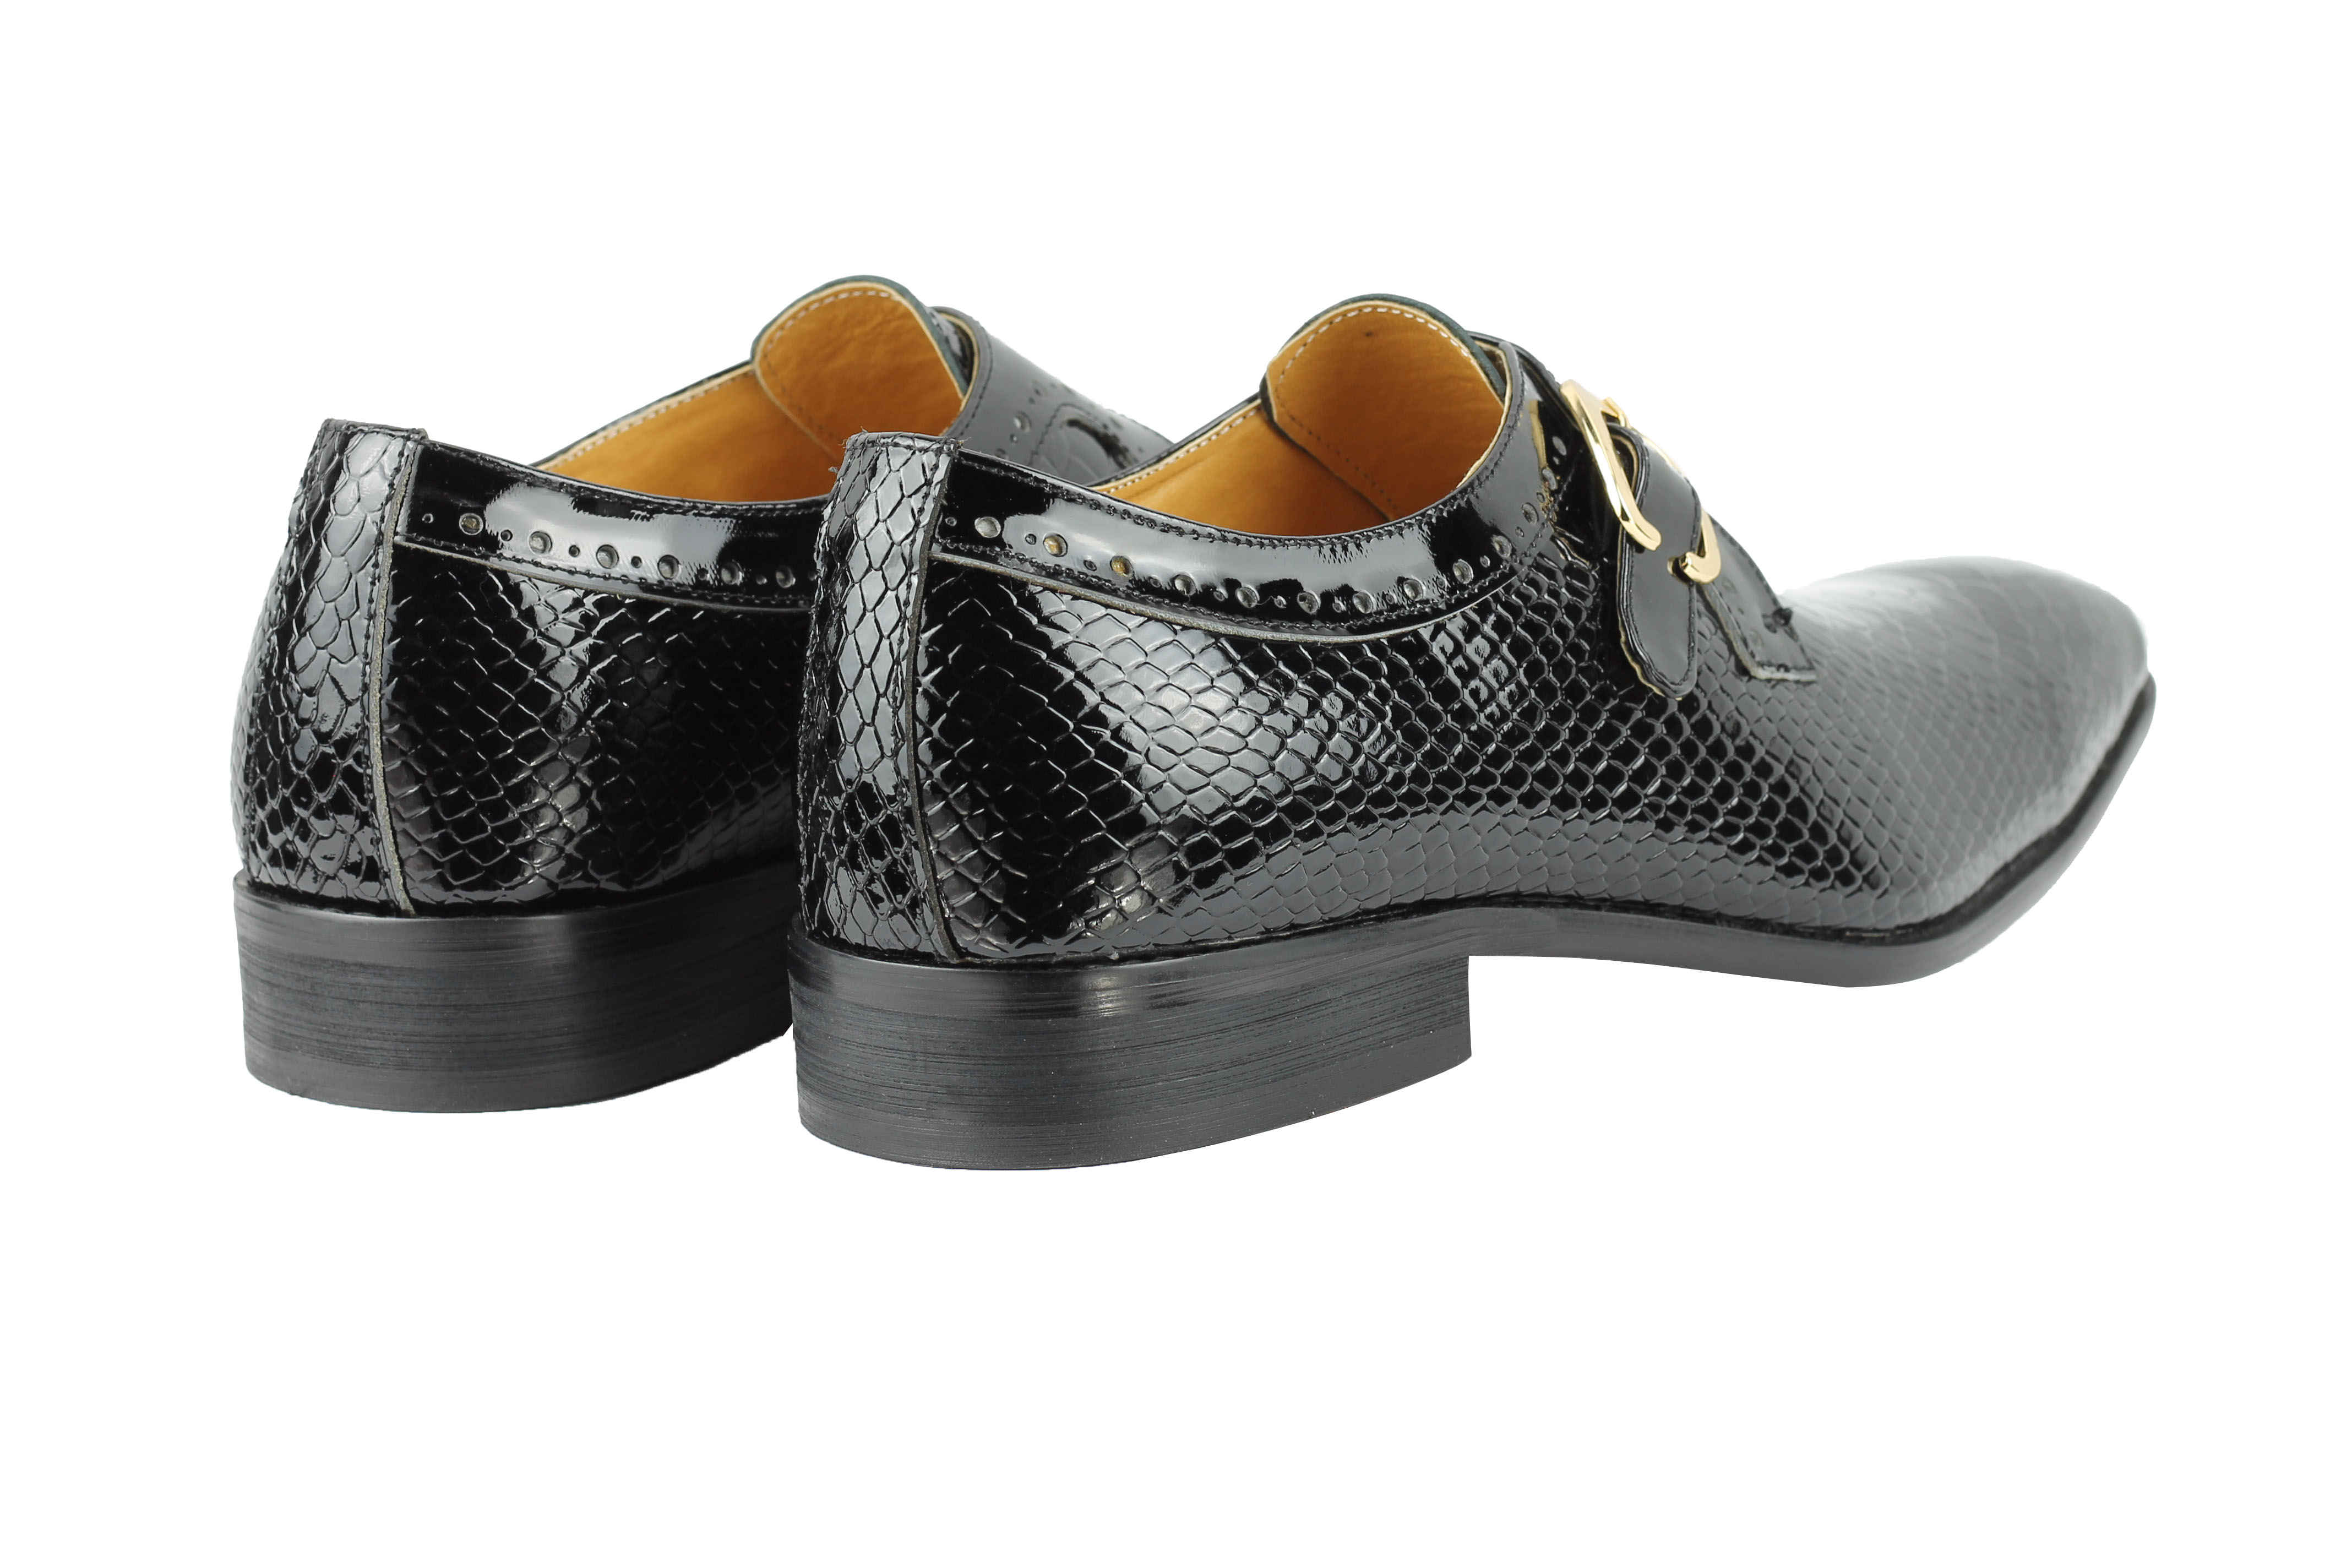 Black Printed Leather Shoes With Monk